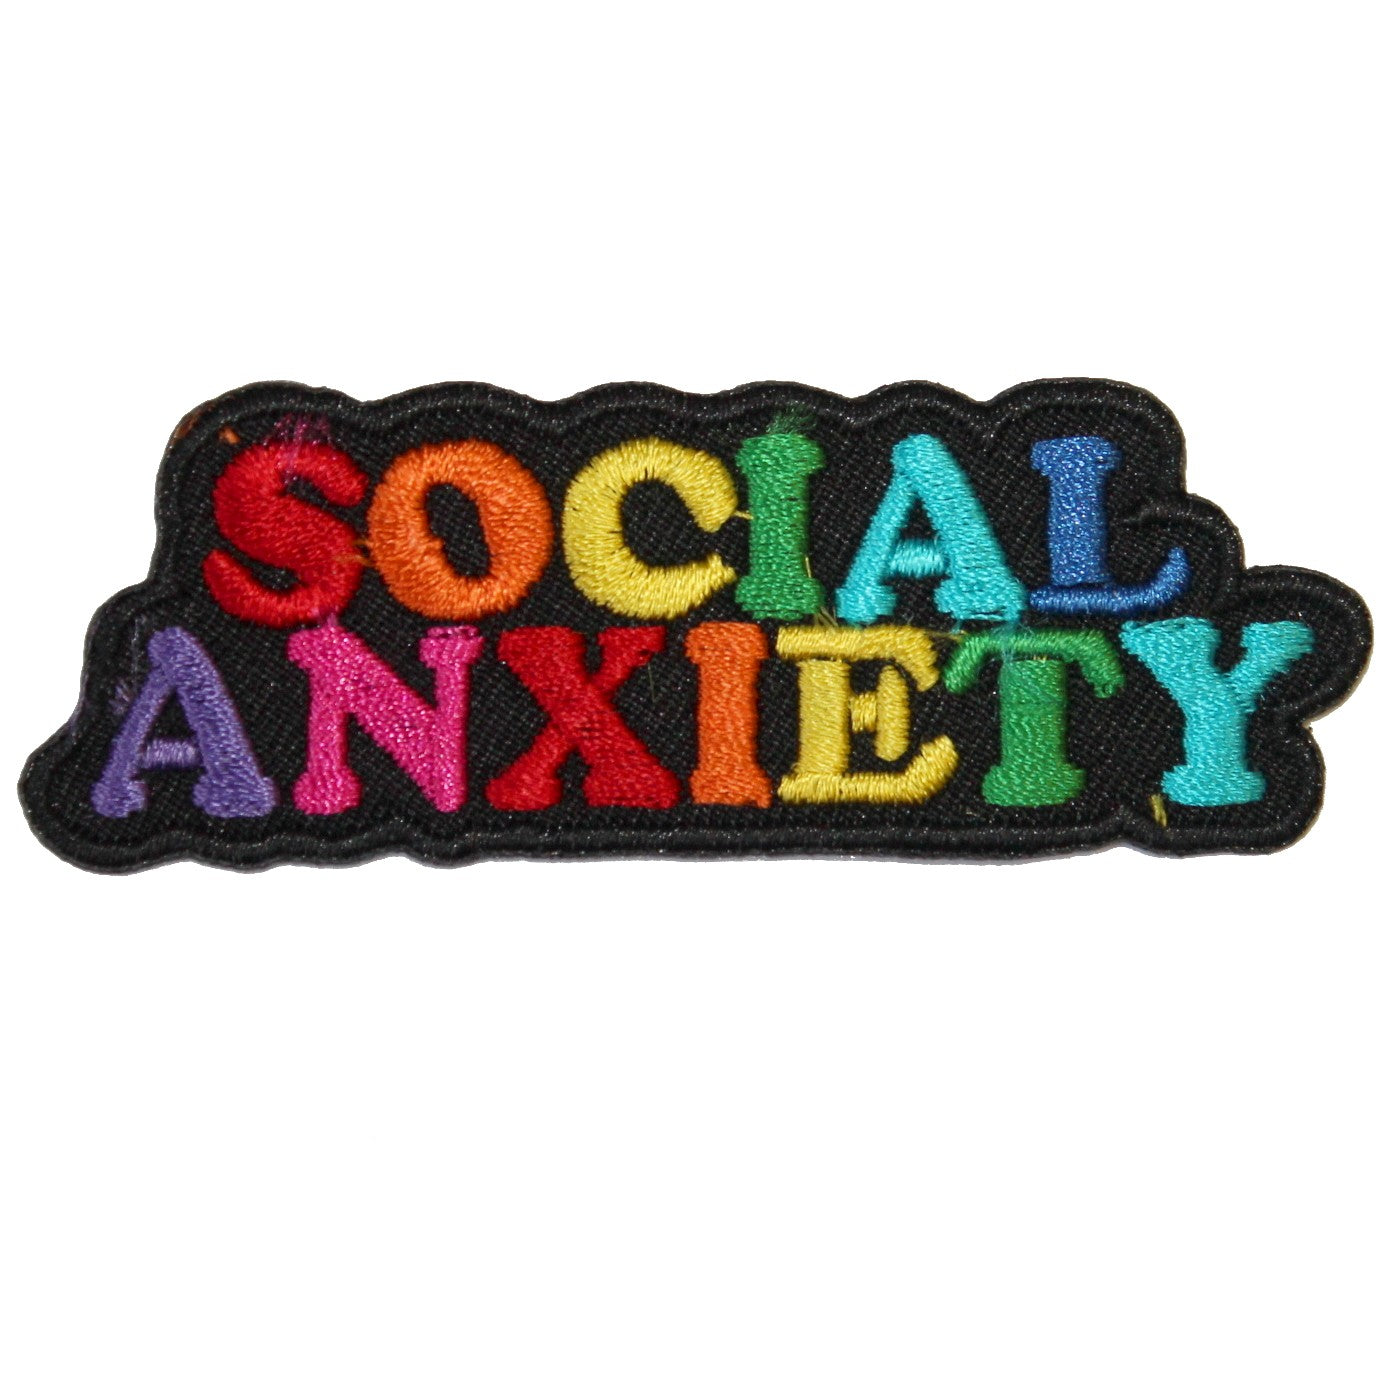 SOCIAL ANXIETY PATCH